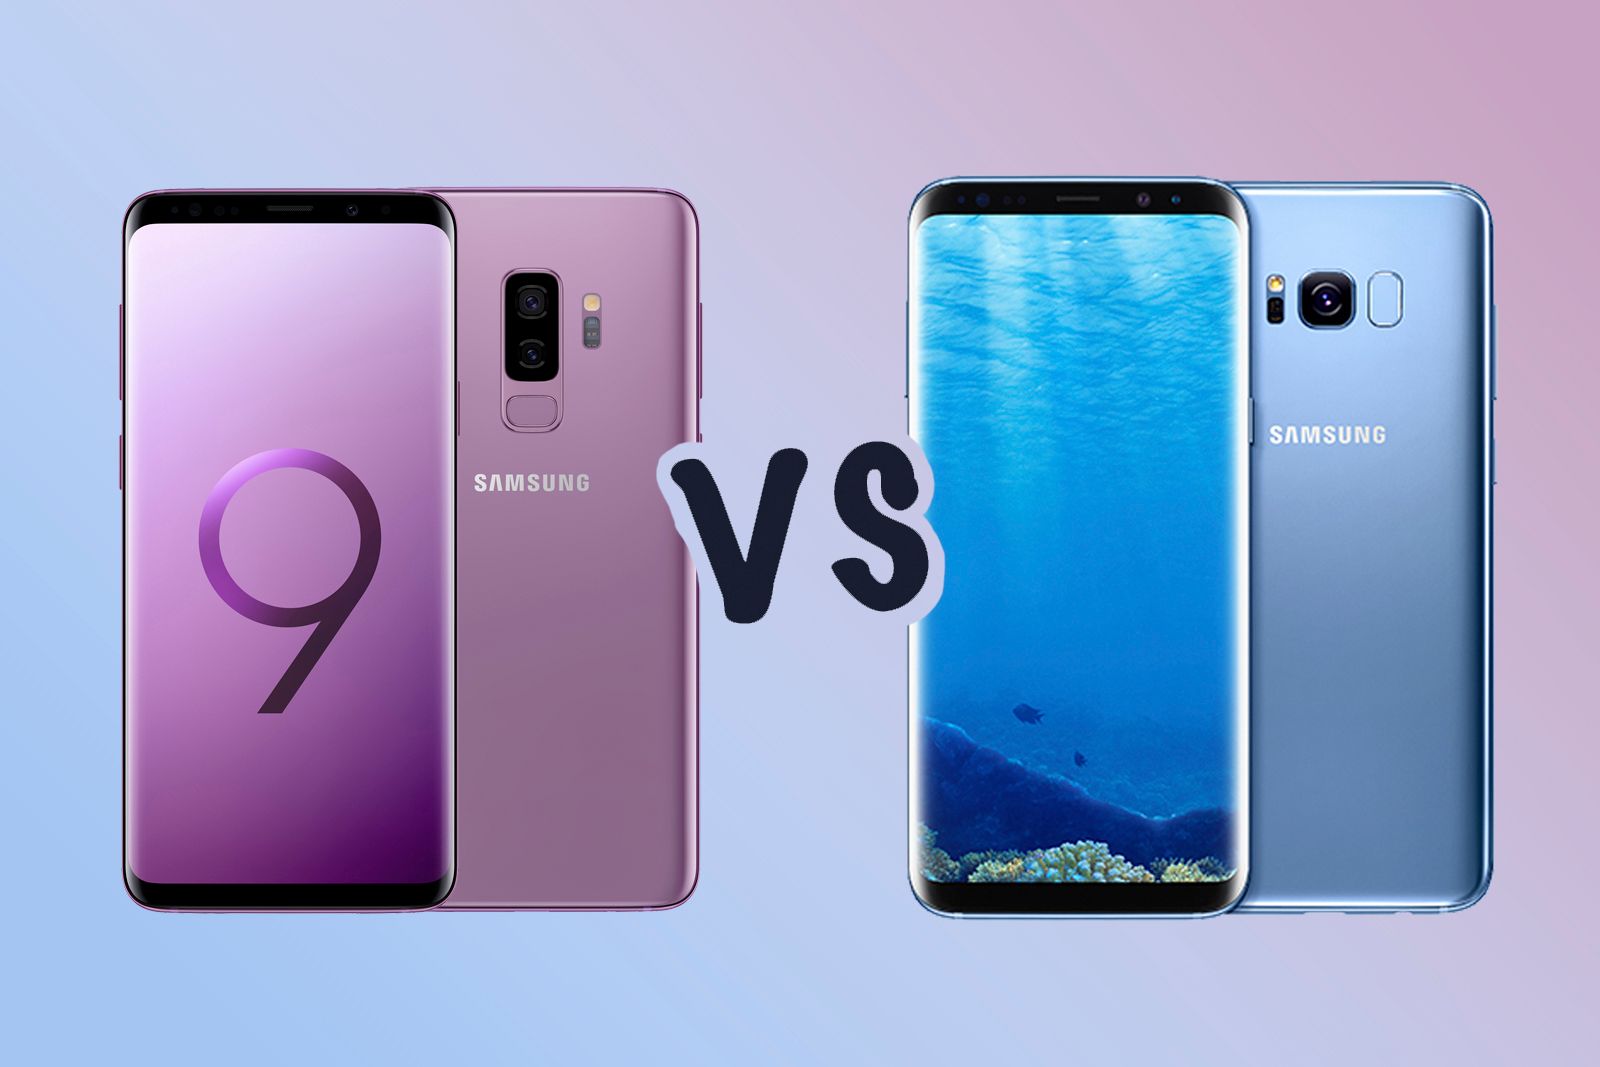 Samsung Galaxy S9 Vs Galaxy S8 Whats The Difference image 1